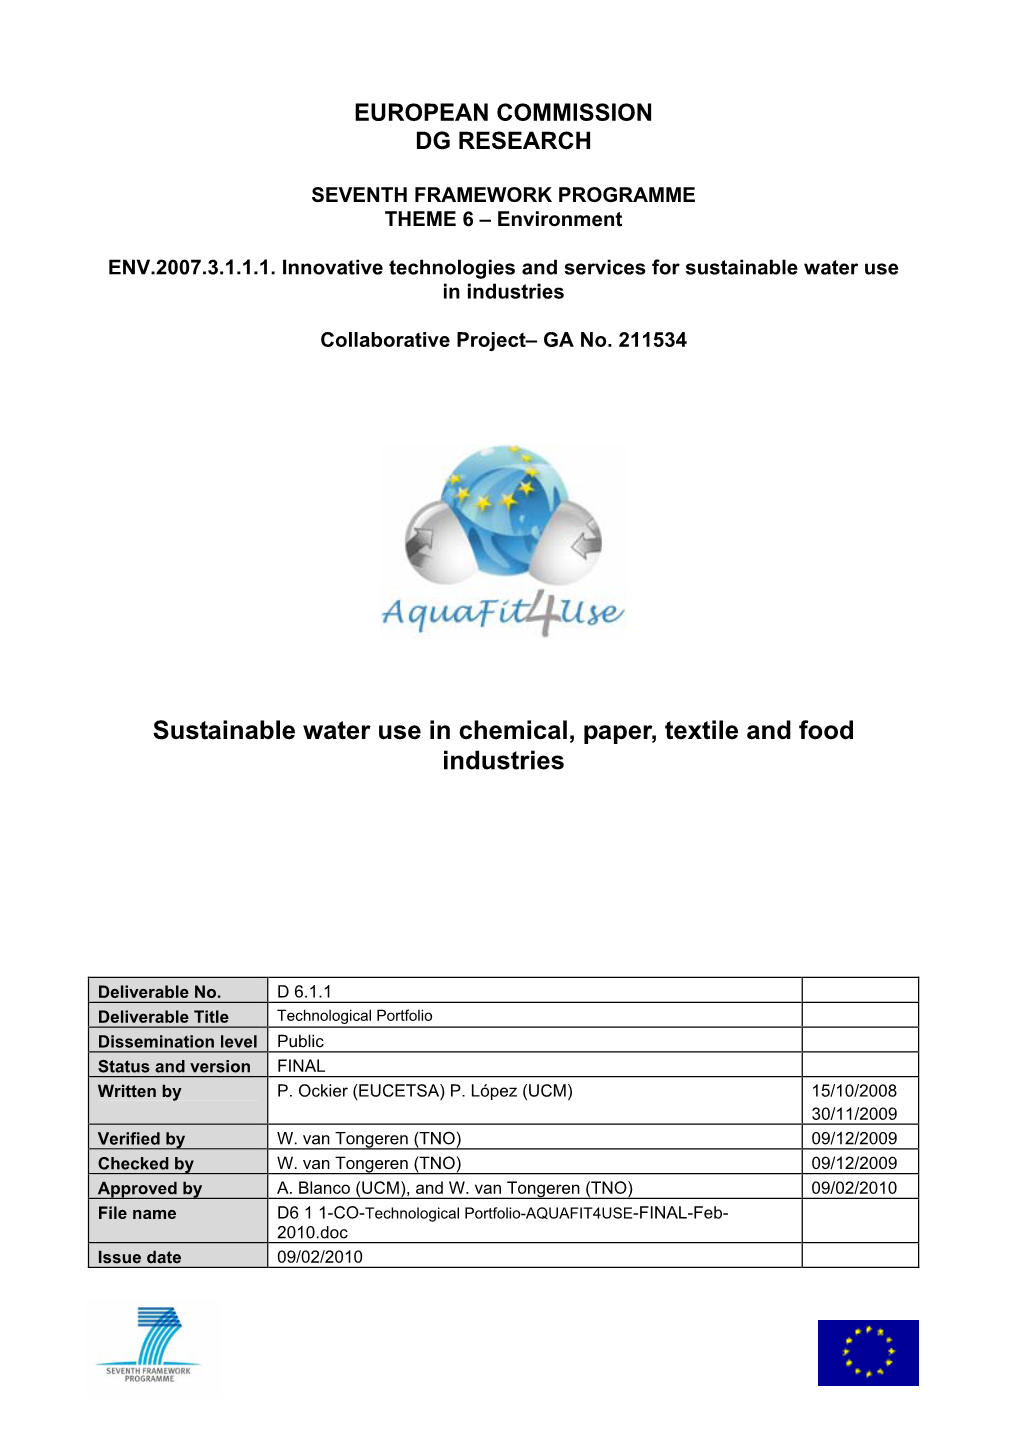 Sustainable Water Use in Chemical, Paper, Textile and Food Industries